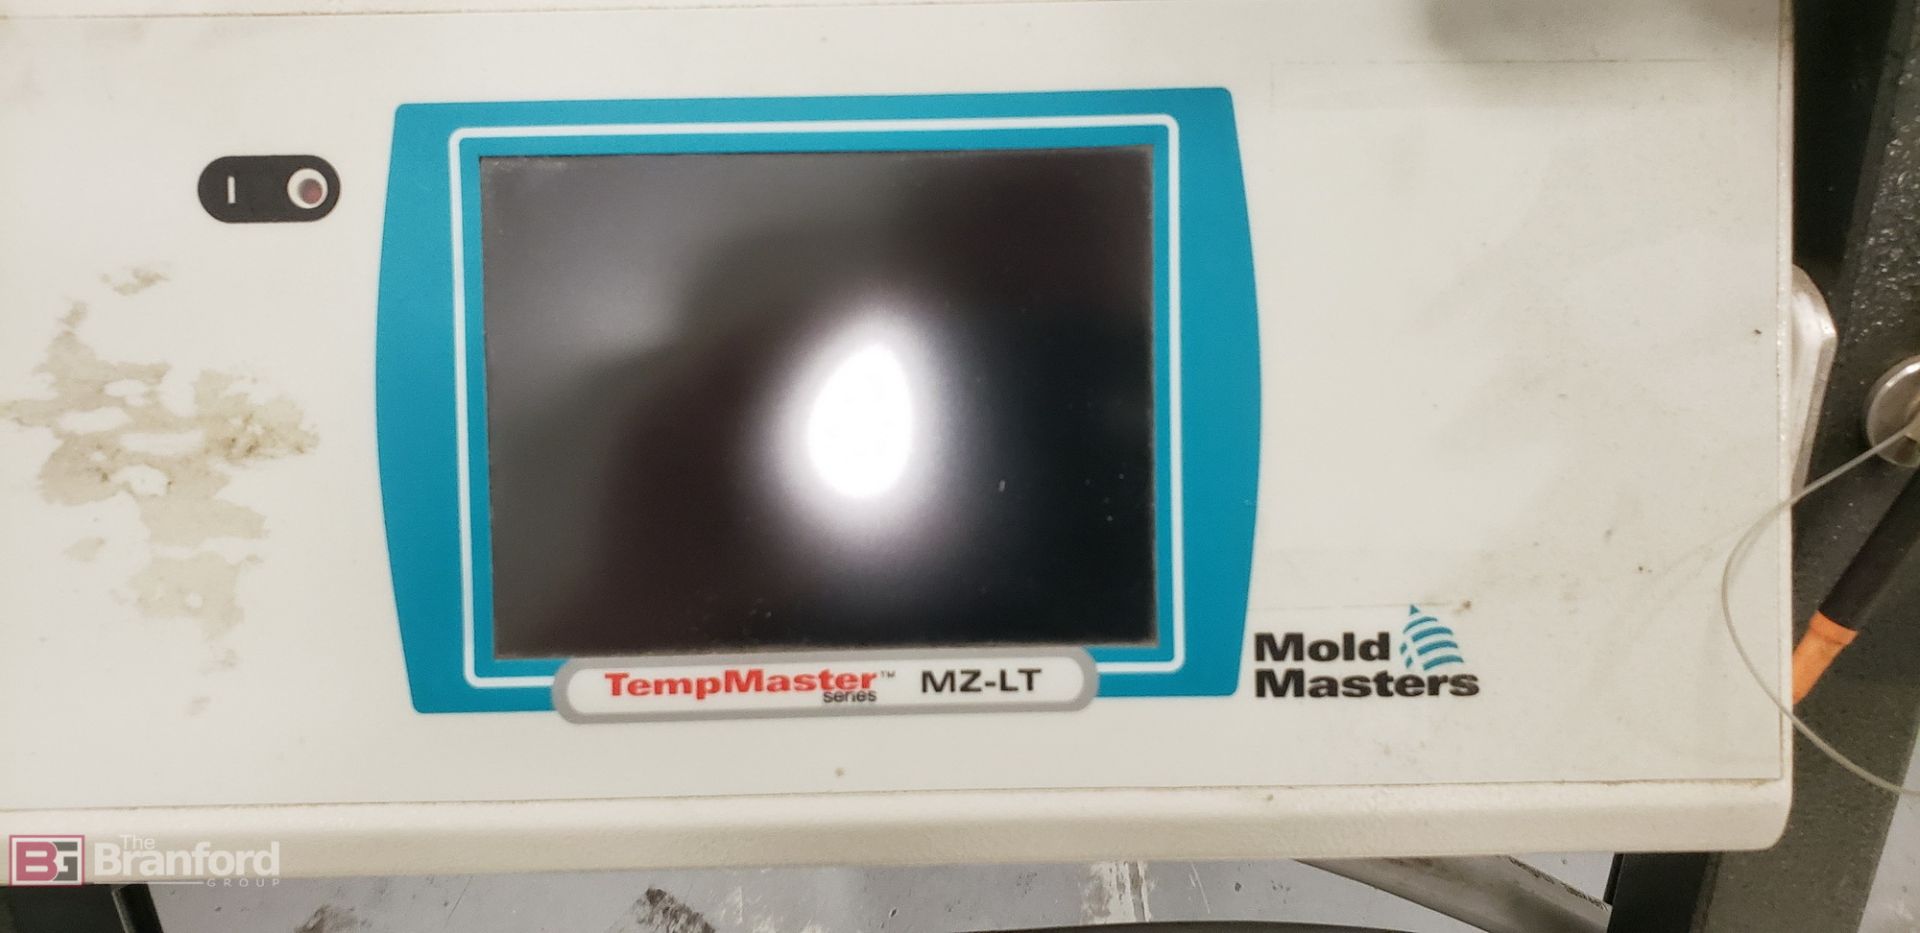 Mold Masters TempMaster 12-Zone Hot Runner - Image 2 of 4